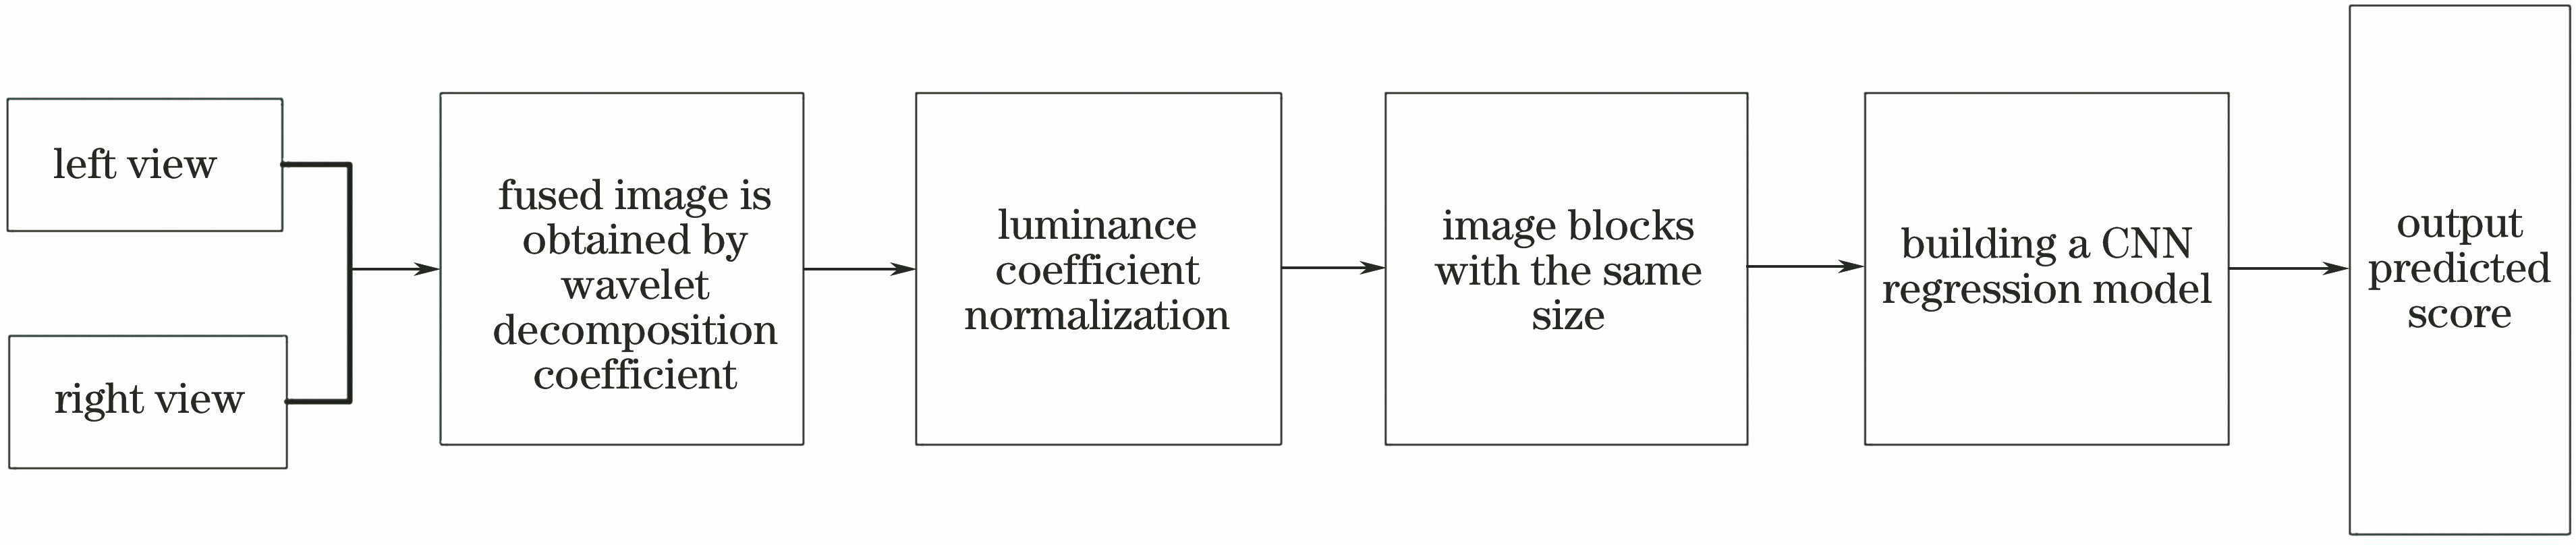 Framework of stereo image quality assessment algorithm based on fused image and convolutional neural network